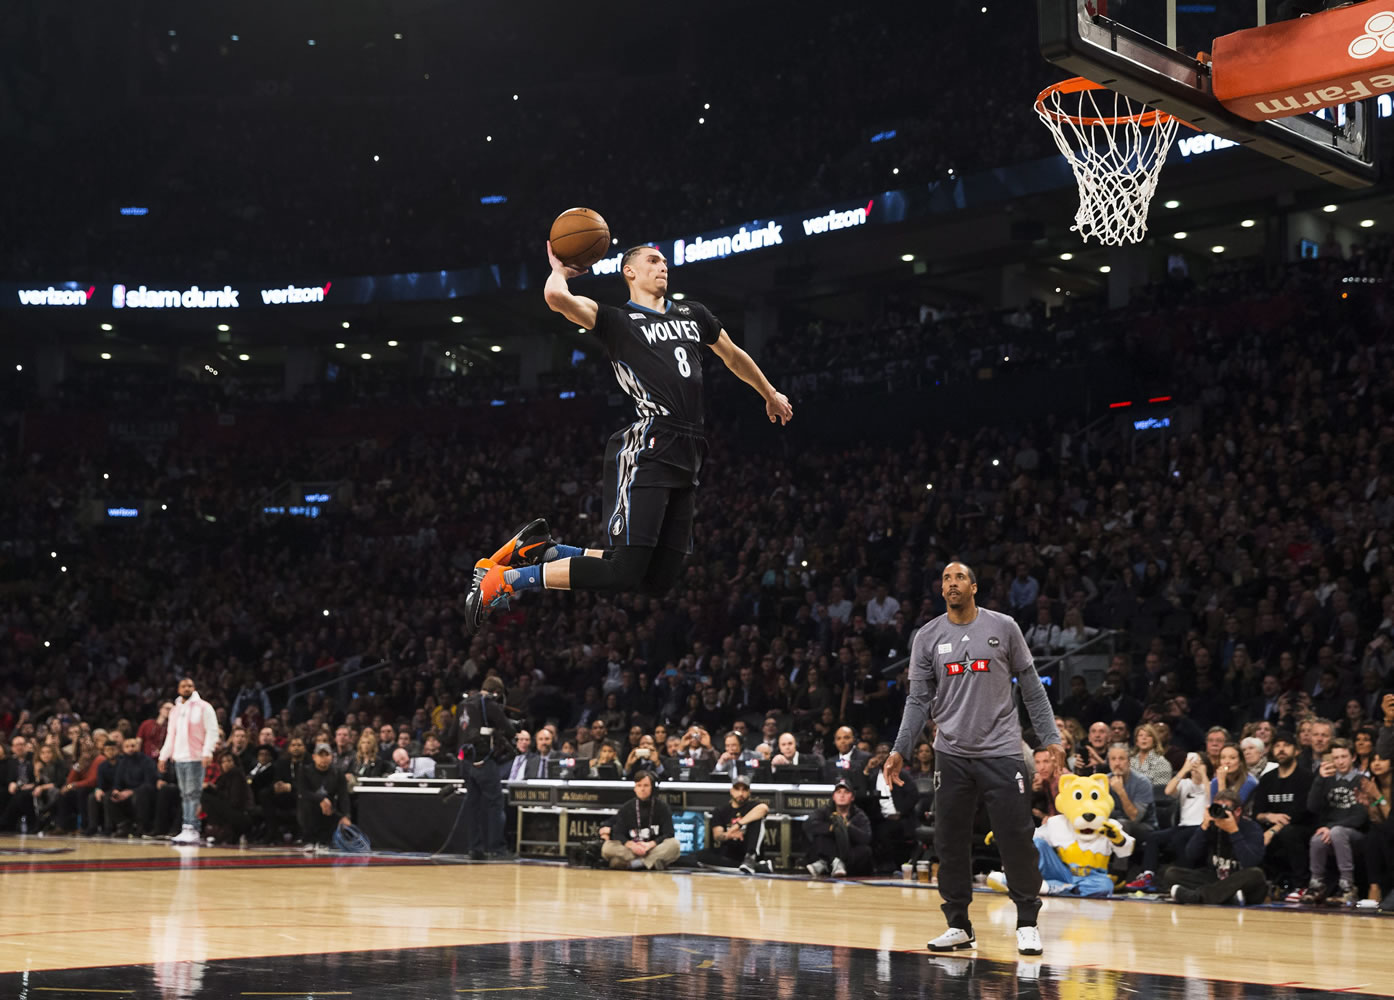 Minnesota Timberwolves&#039; Zach LaVine slam dunks the ball during the NBA all-star skills competition in Toronto on Saturday, Feb. 13, 2016.